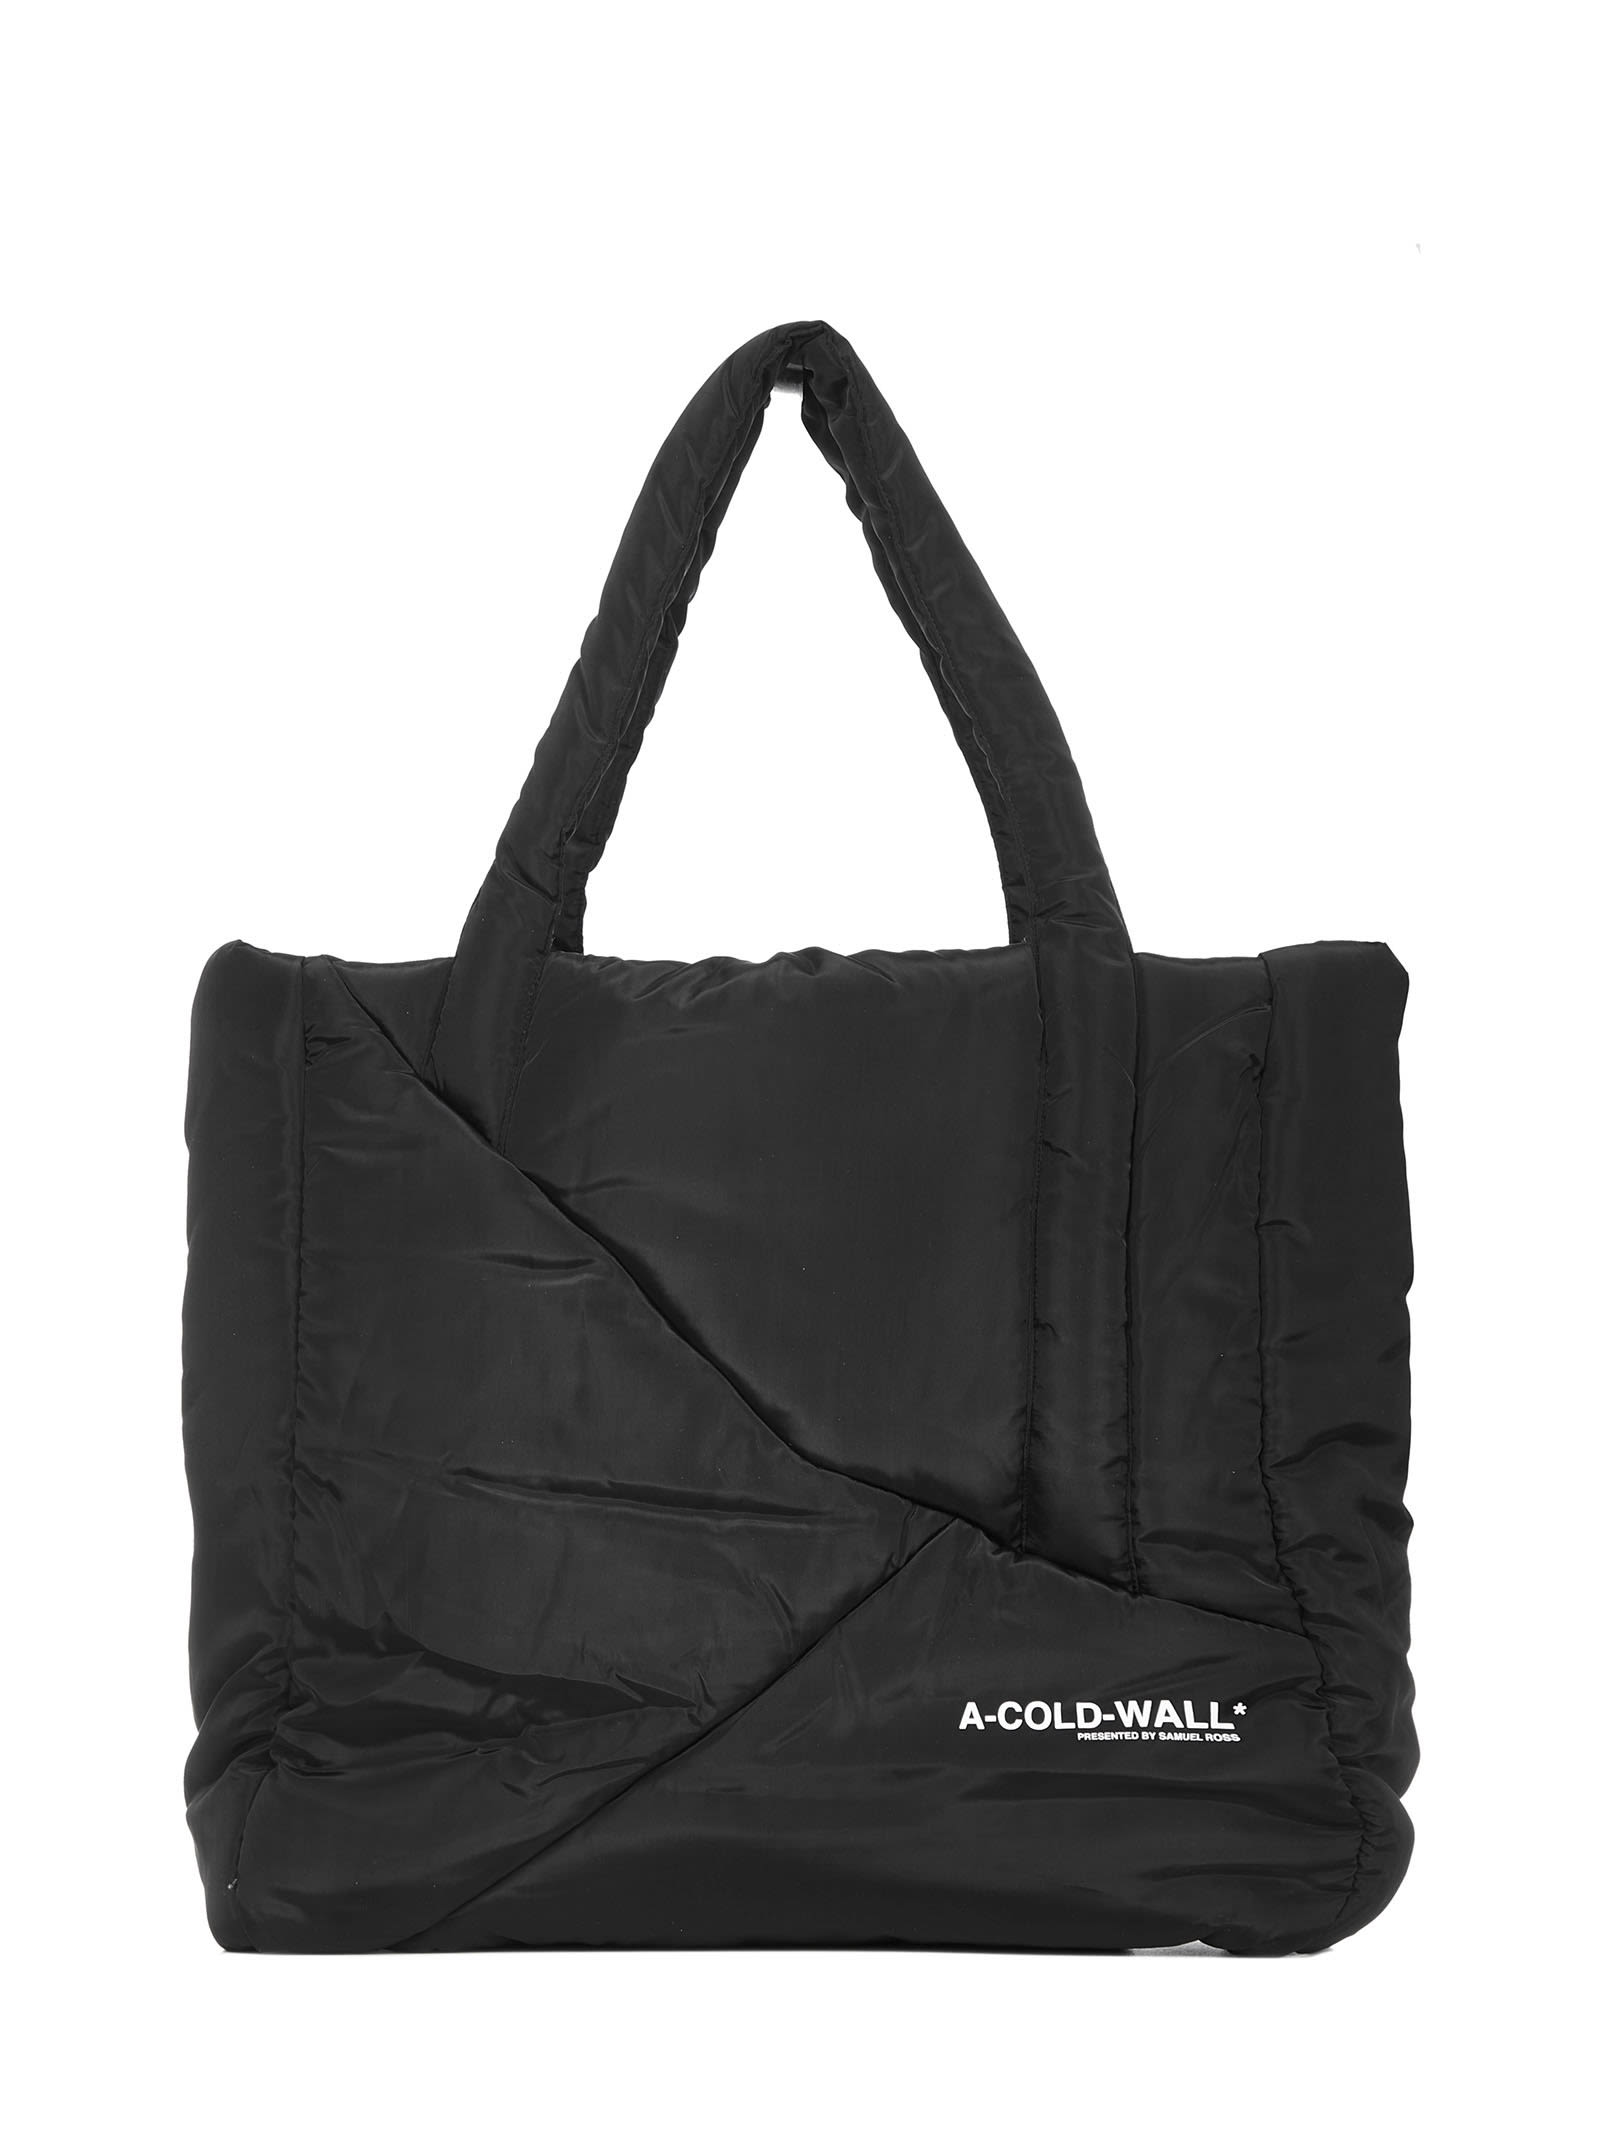 A-COLD-WALL* A COLD WALL TOTE BAG,11523428